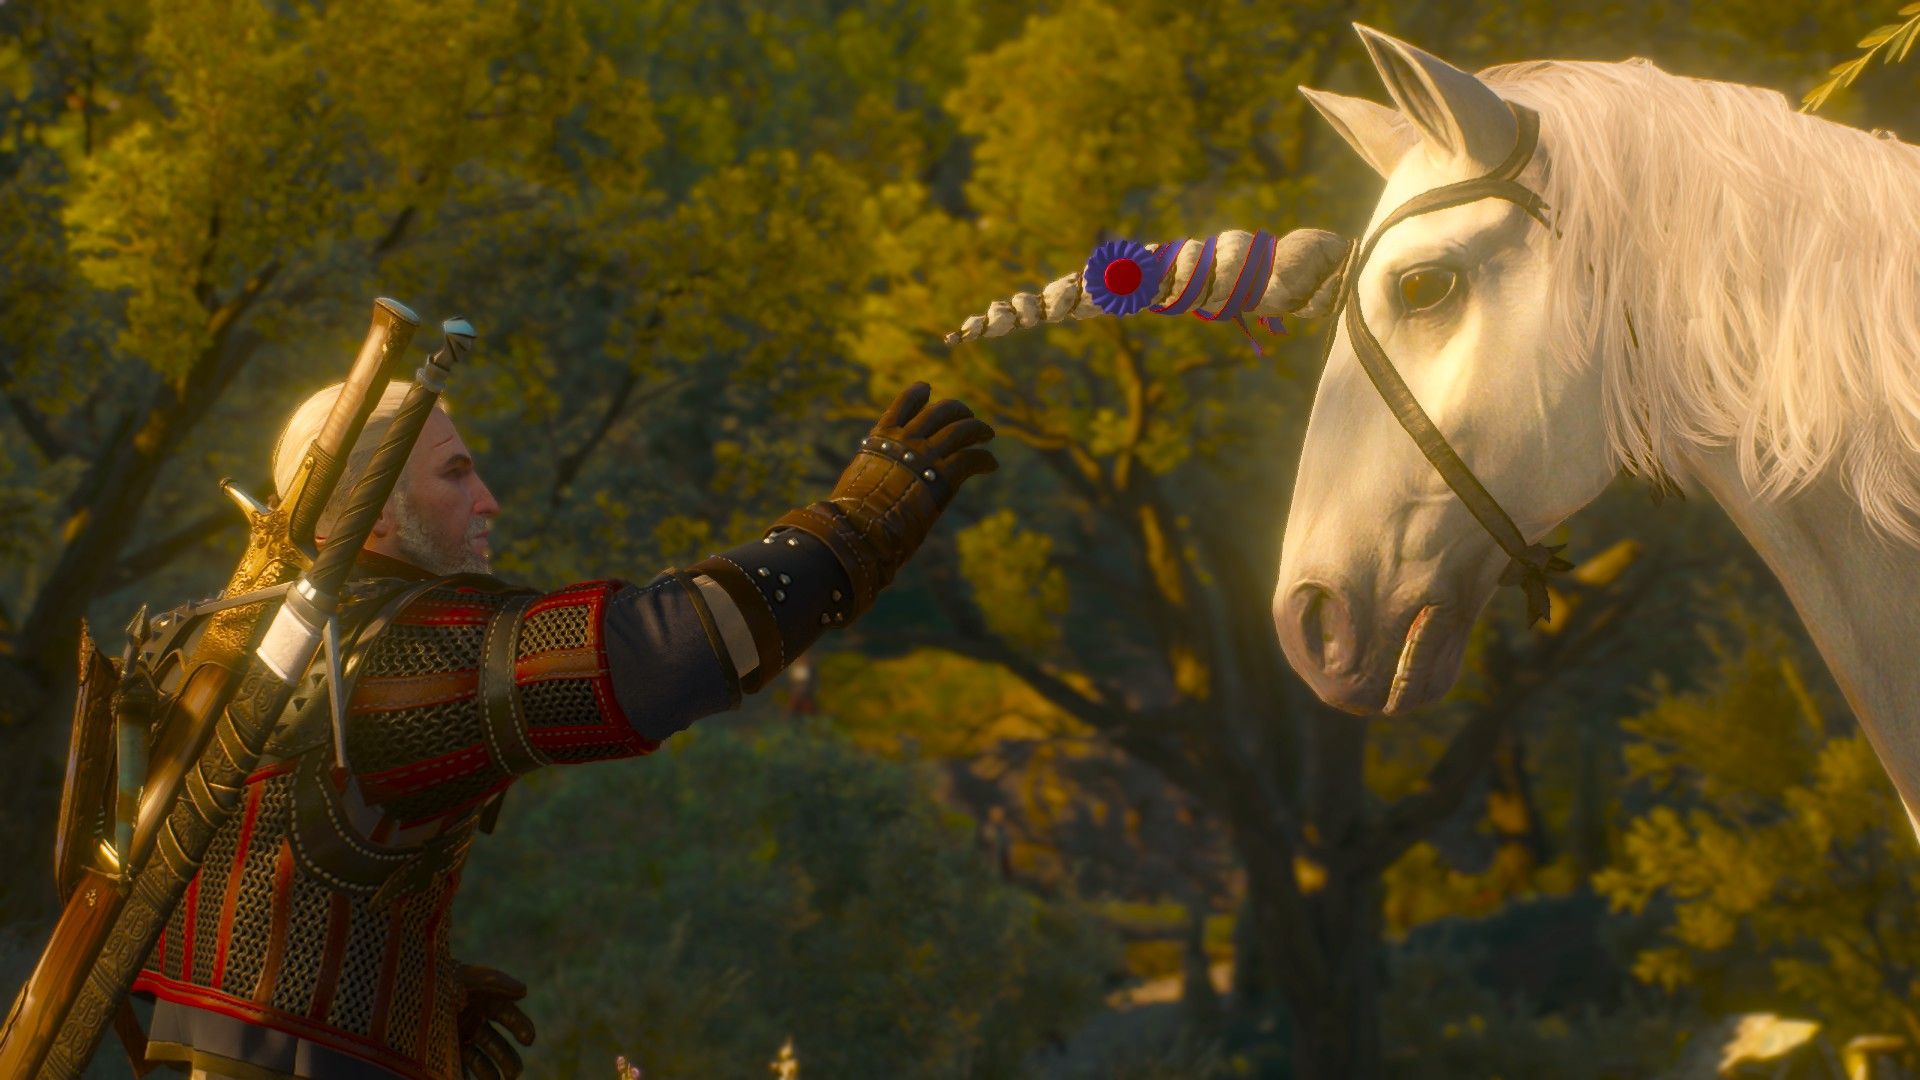 Geralt reaches for the horn taped to Toussaint's horse's forehead.